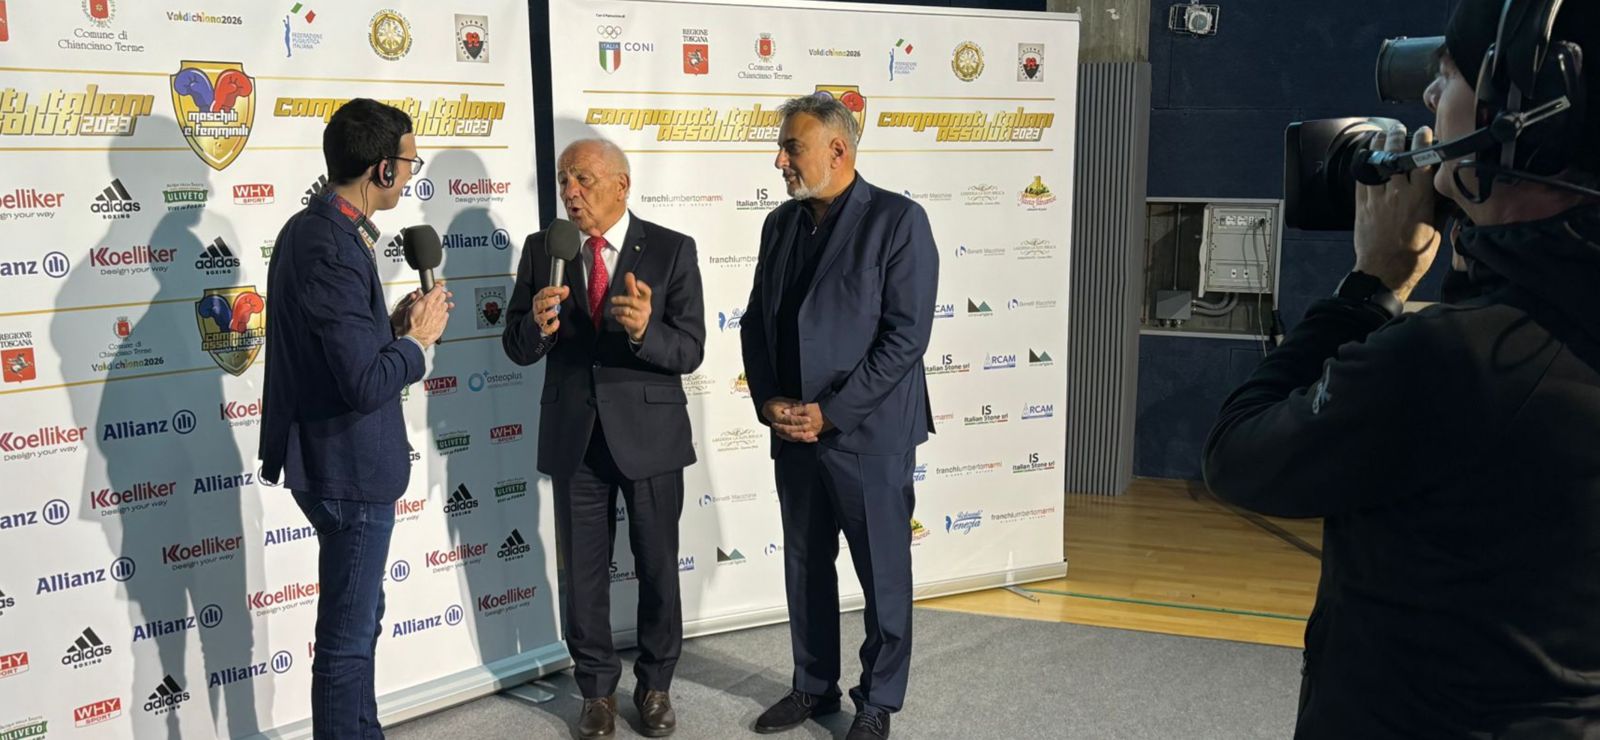 The IBA R&J course in Italy at the National Boxing Championships is over